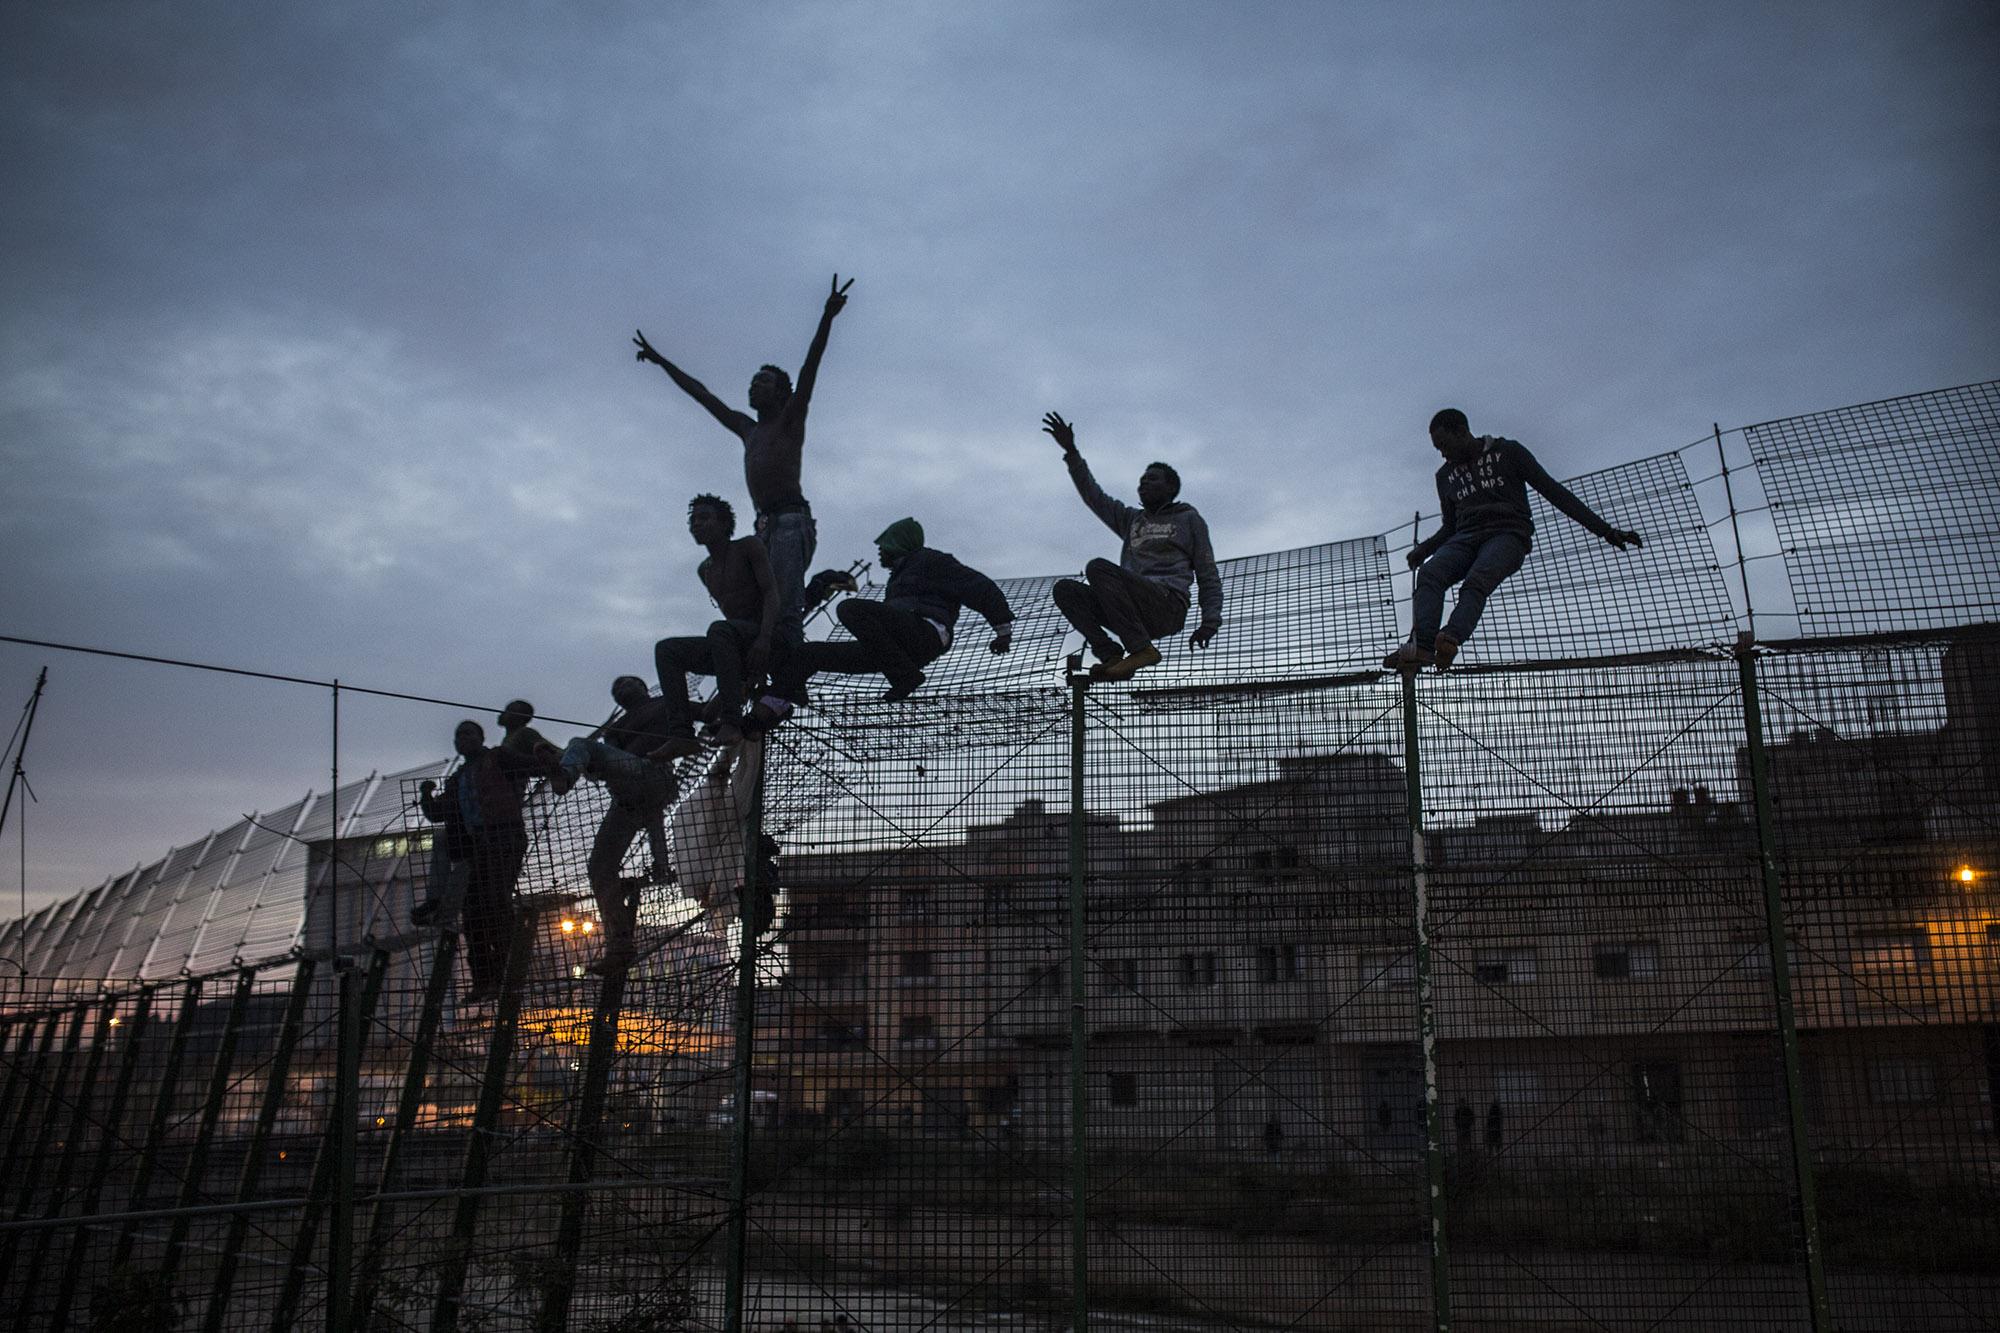 Sub-Saharan migrants climb over a metallic fence that divides Morocco and the Spanish enclave of Melilla on Friday March 28, 2014. Several hundred African migrants tried to cross barbed-wire border fences to enter the Spanish enclave of Melilla from Morocco but most were blocked by Moroccan police or pushed back by the Spanish Guardia Civil as a handful managed to remain in European soil. In early 2014 thousands of migrants seeking a better life who couldn&#39;t afford to pay to cross the Mediterranean sea aboard a rubber raft to get to Europe, were living illegally in the forests of north Morocco hoping they could enter Melilla and Spain&#39;s other north African coastal enclave, Ceuta. (&copy; Santi Palacios)